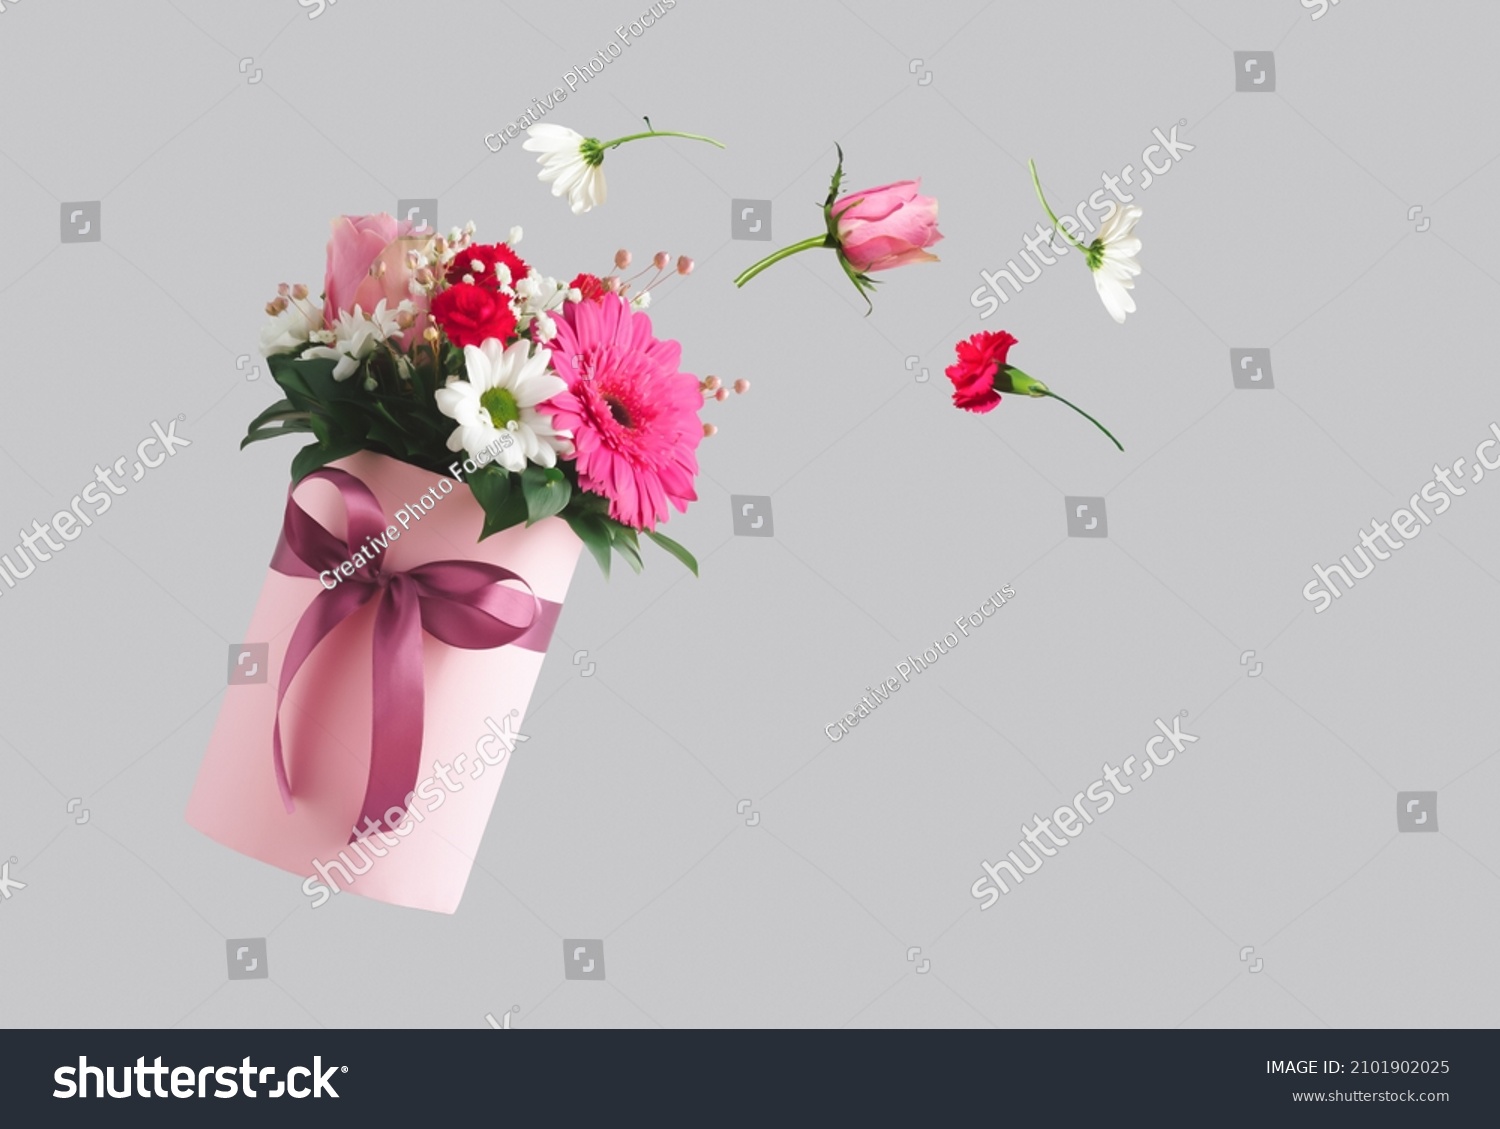 Pink gift box with various flowers on grey background. Flying flowers from the box. Valentines day aesthetic nature concept. 8 March card idea. #2101902025